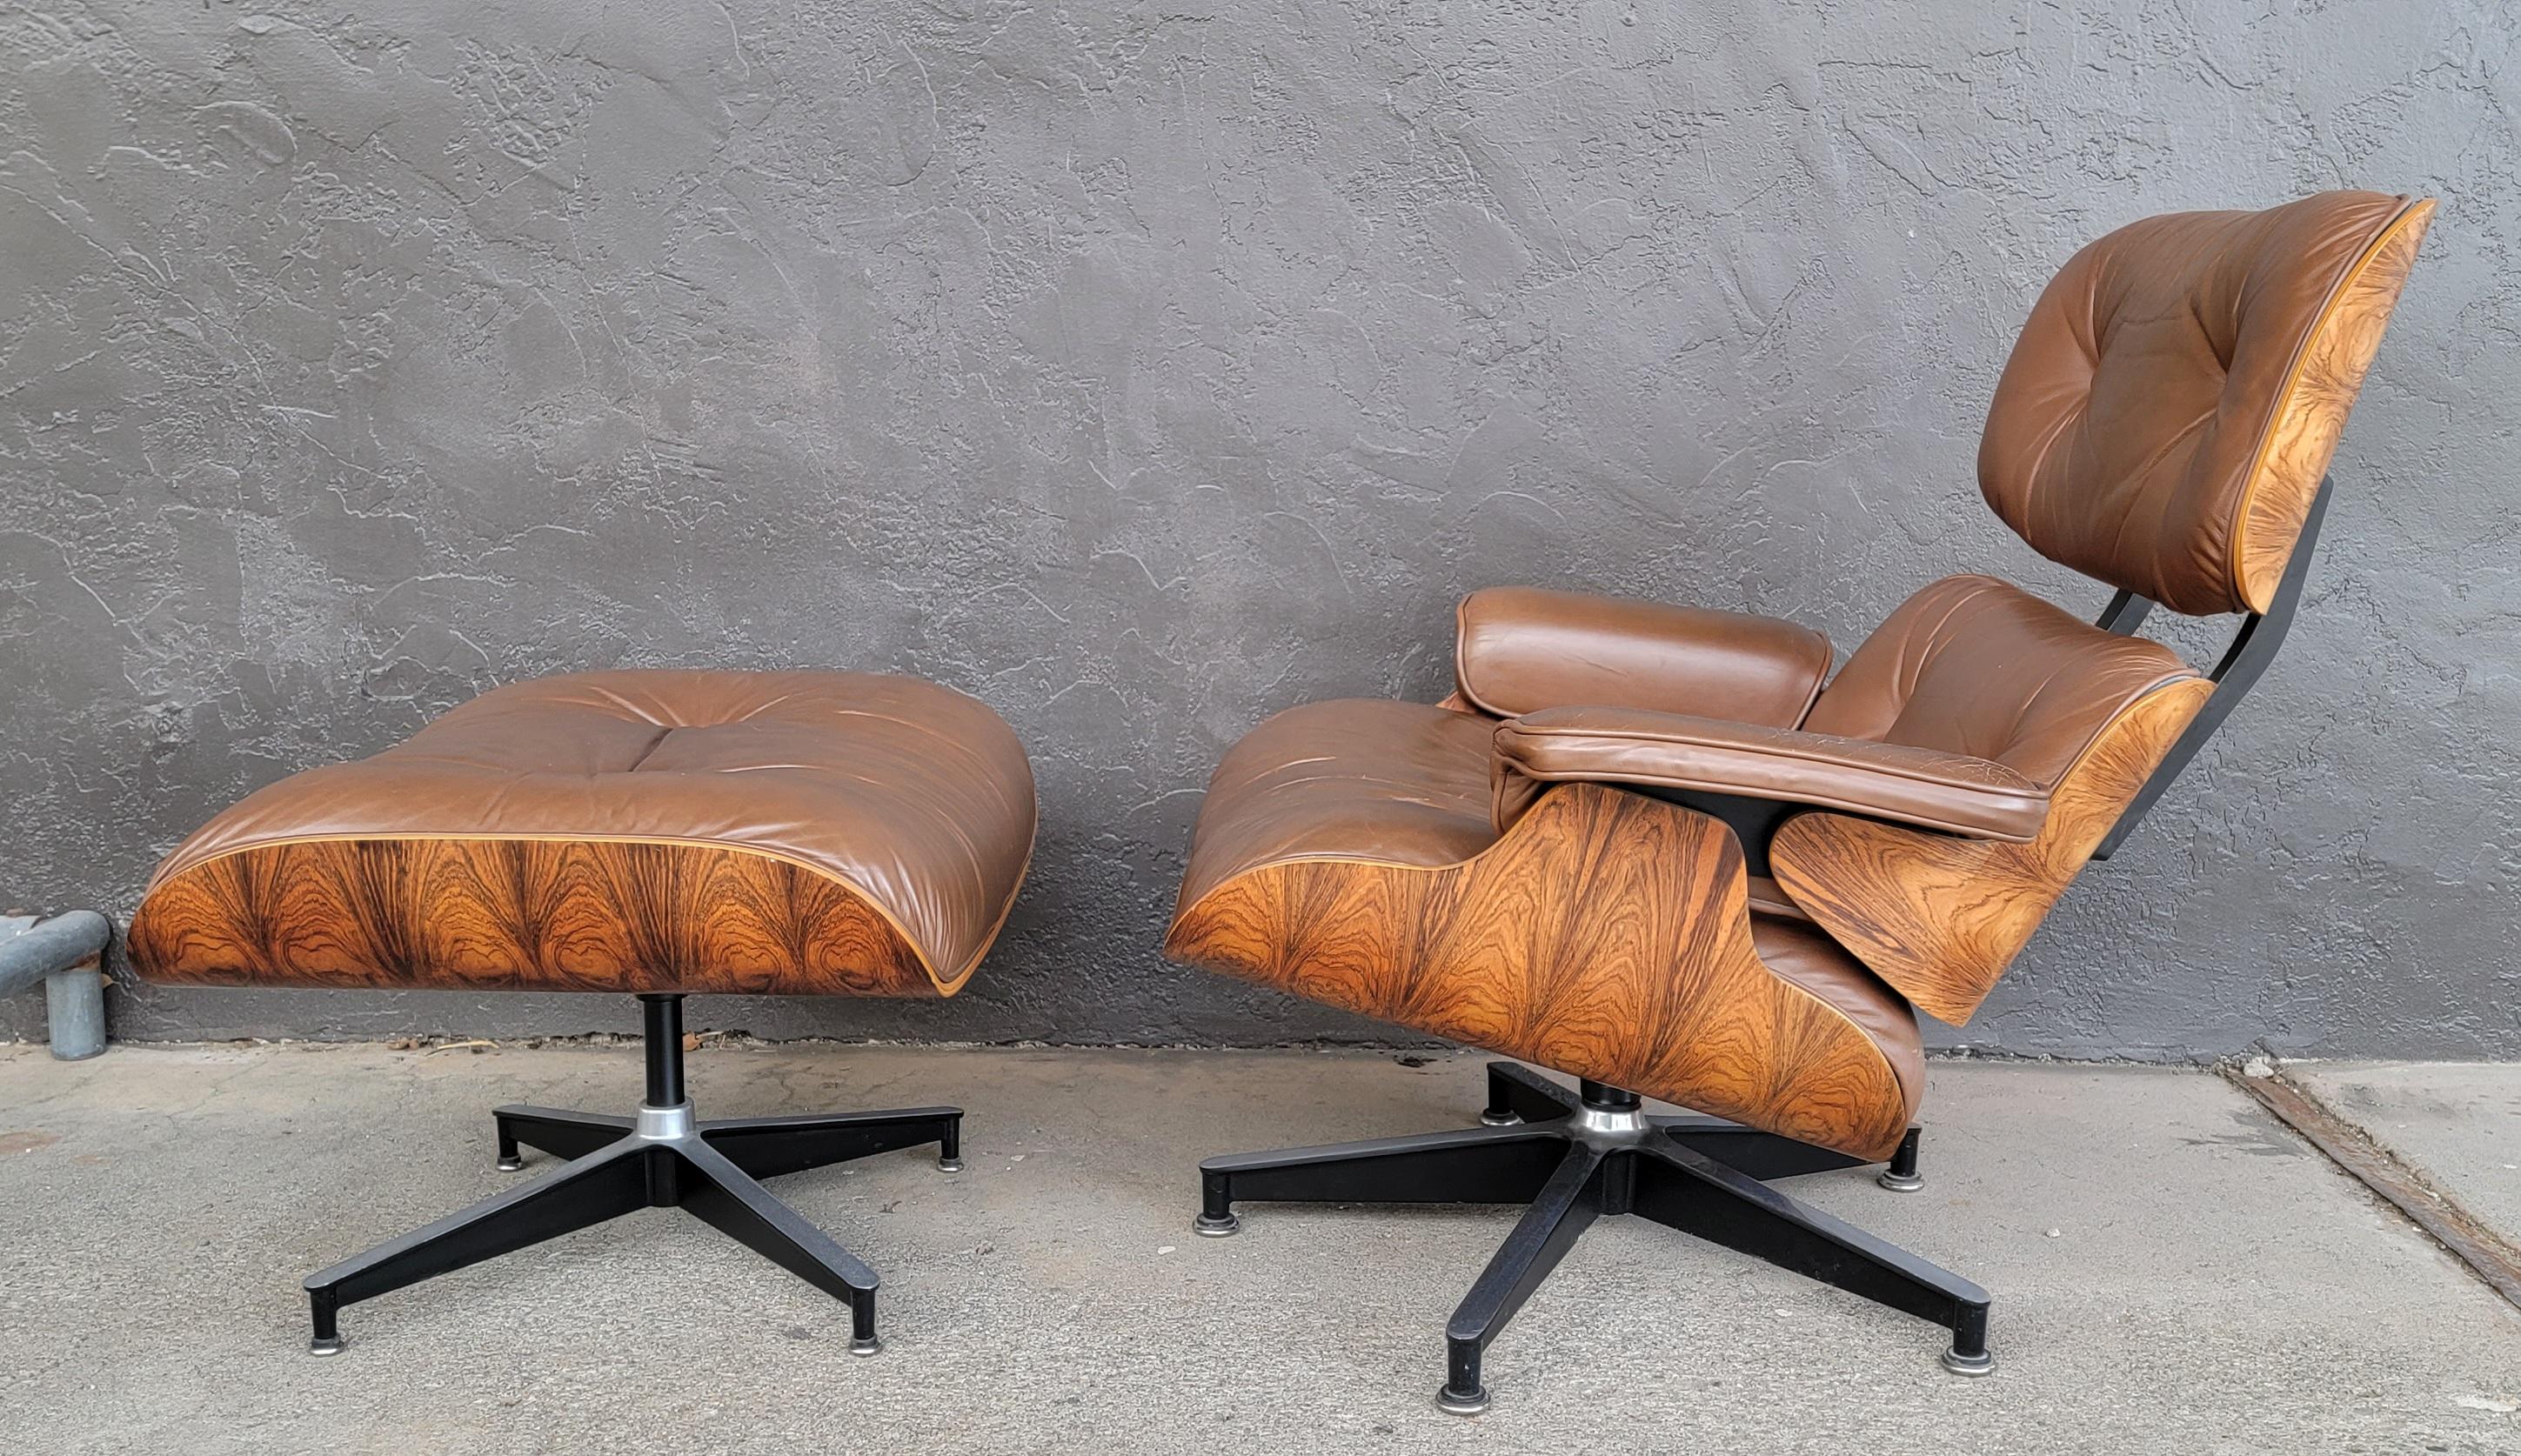 Vintage Eames 670 671 rosewood lounge chair and ottoman. Circa. late 1970's to 1980's. Beautiful wood grain to rosewood. Both pieces retain Herman Miller label. Nice example of a vintage and iconic Eames Lounge Chair.